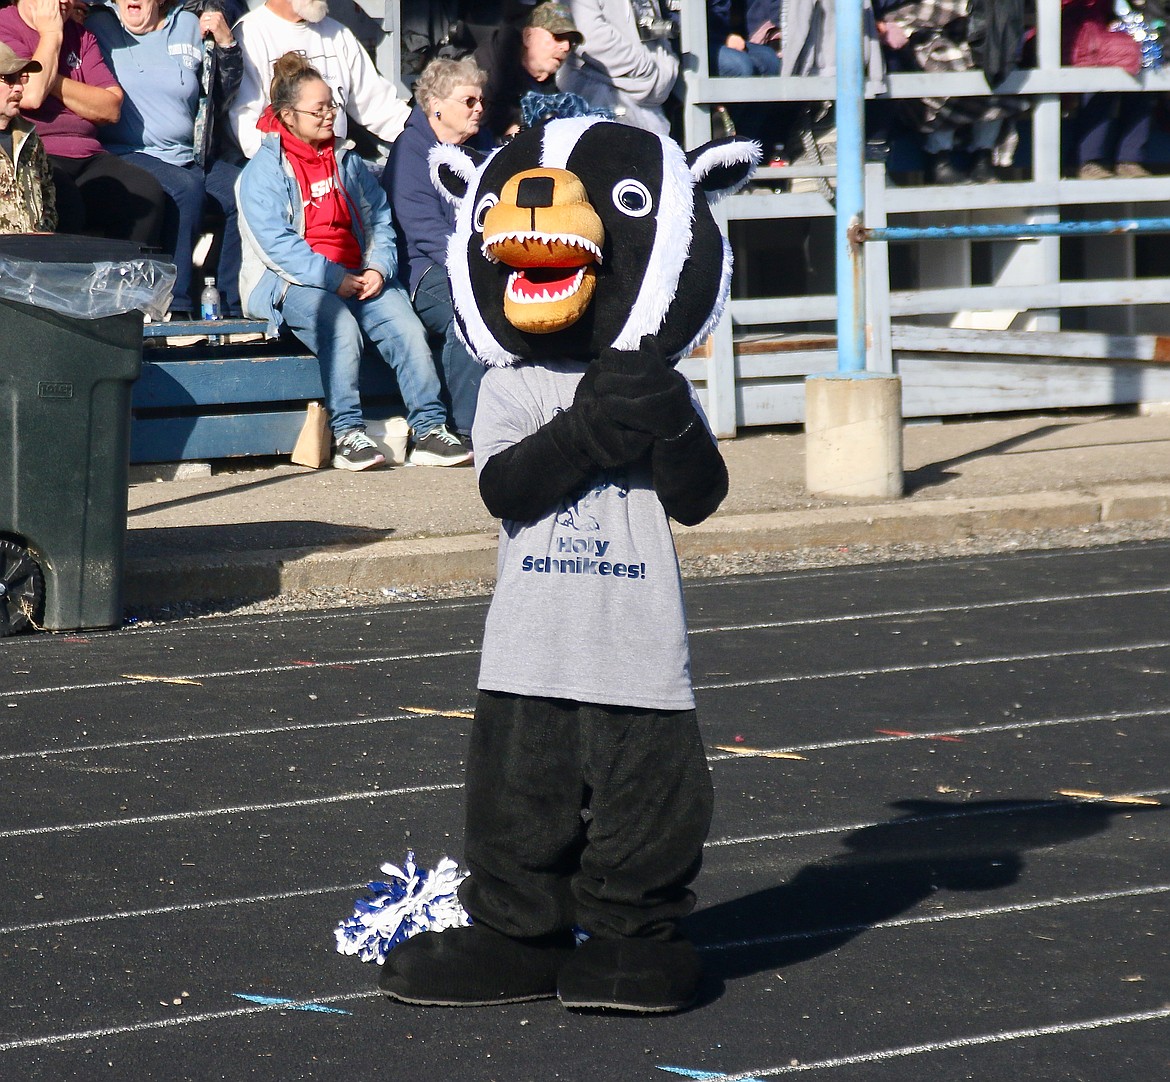 Buddy the Badger in training helps out the cheer team at the playoff game on Oct. 29.